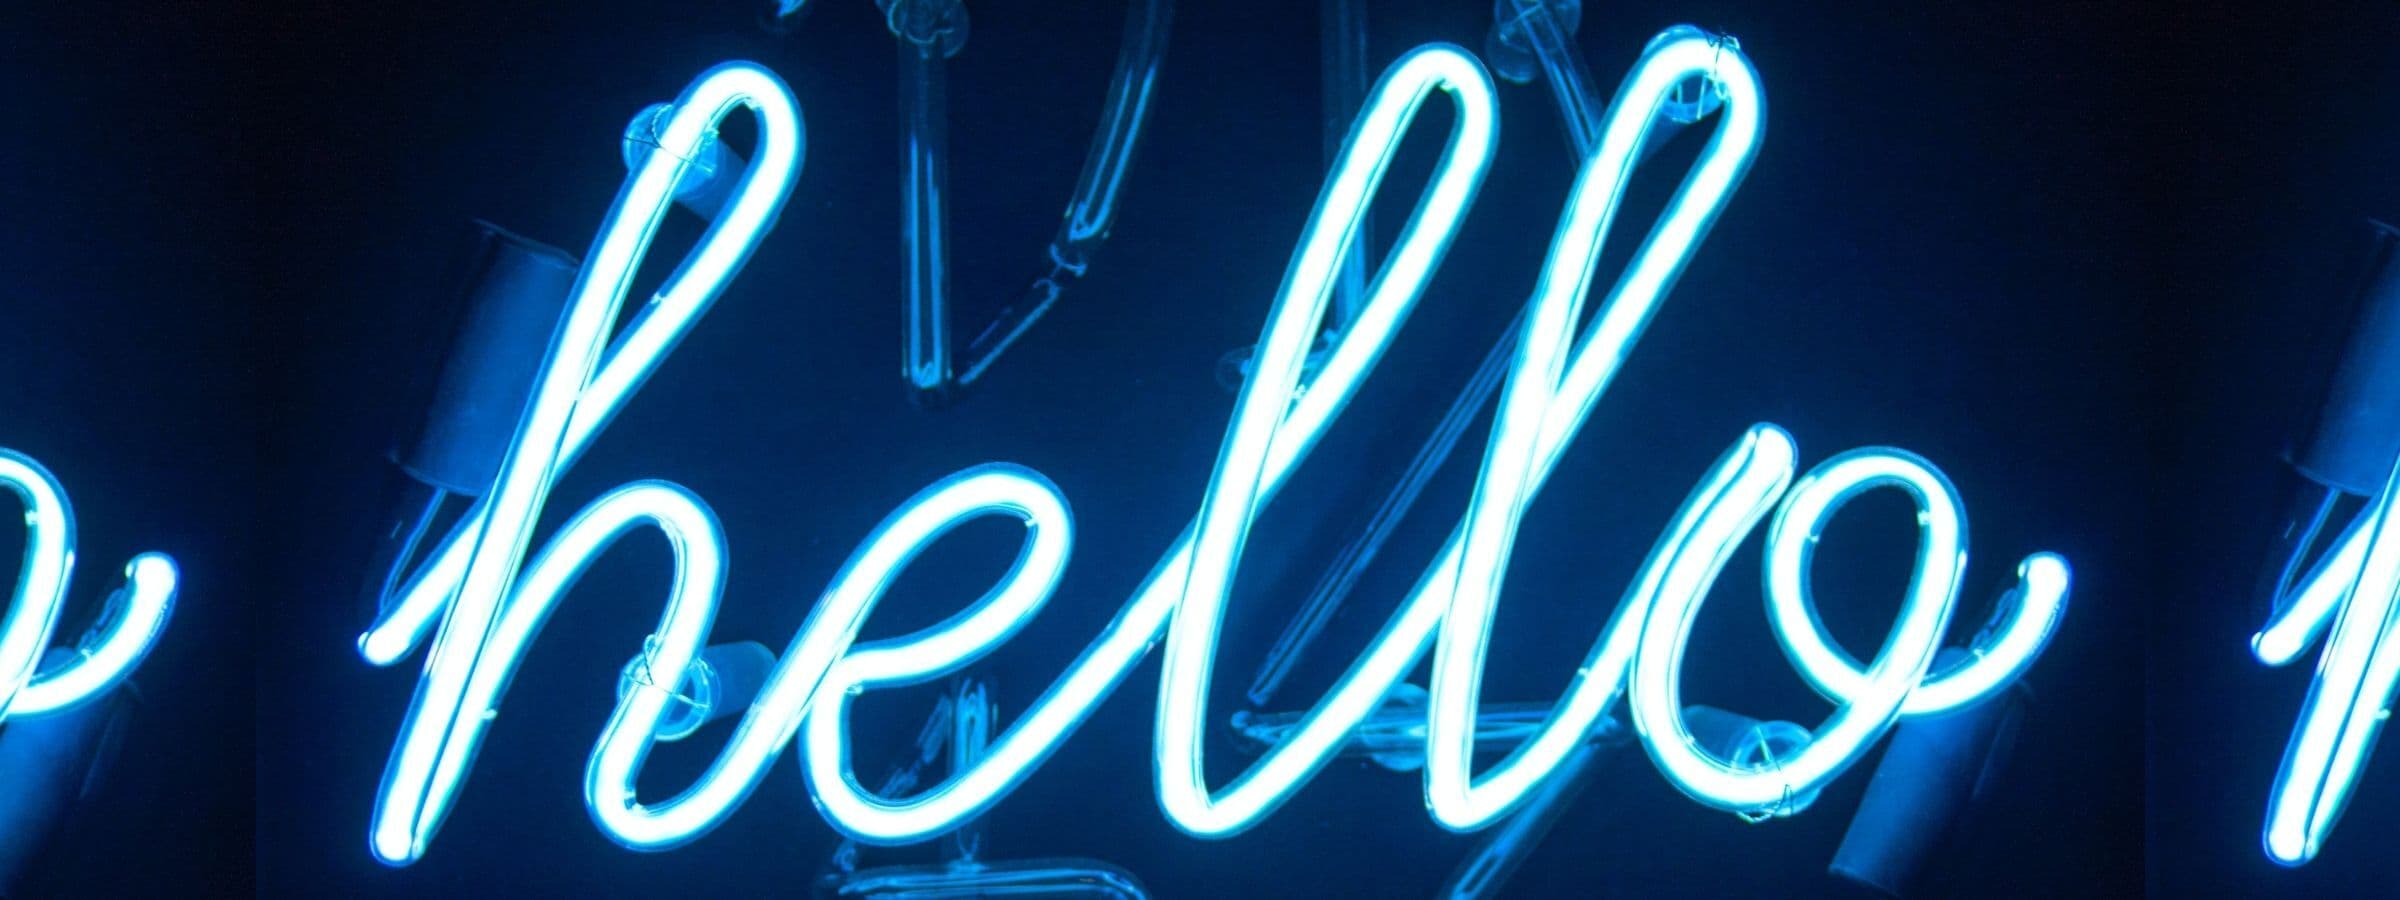 A neon sign that says "hello" in cursive.